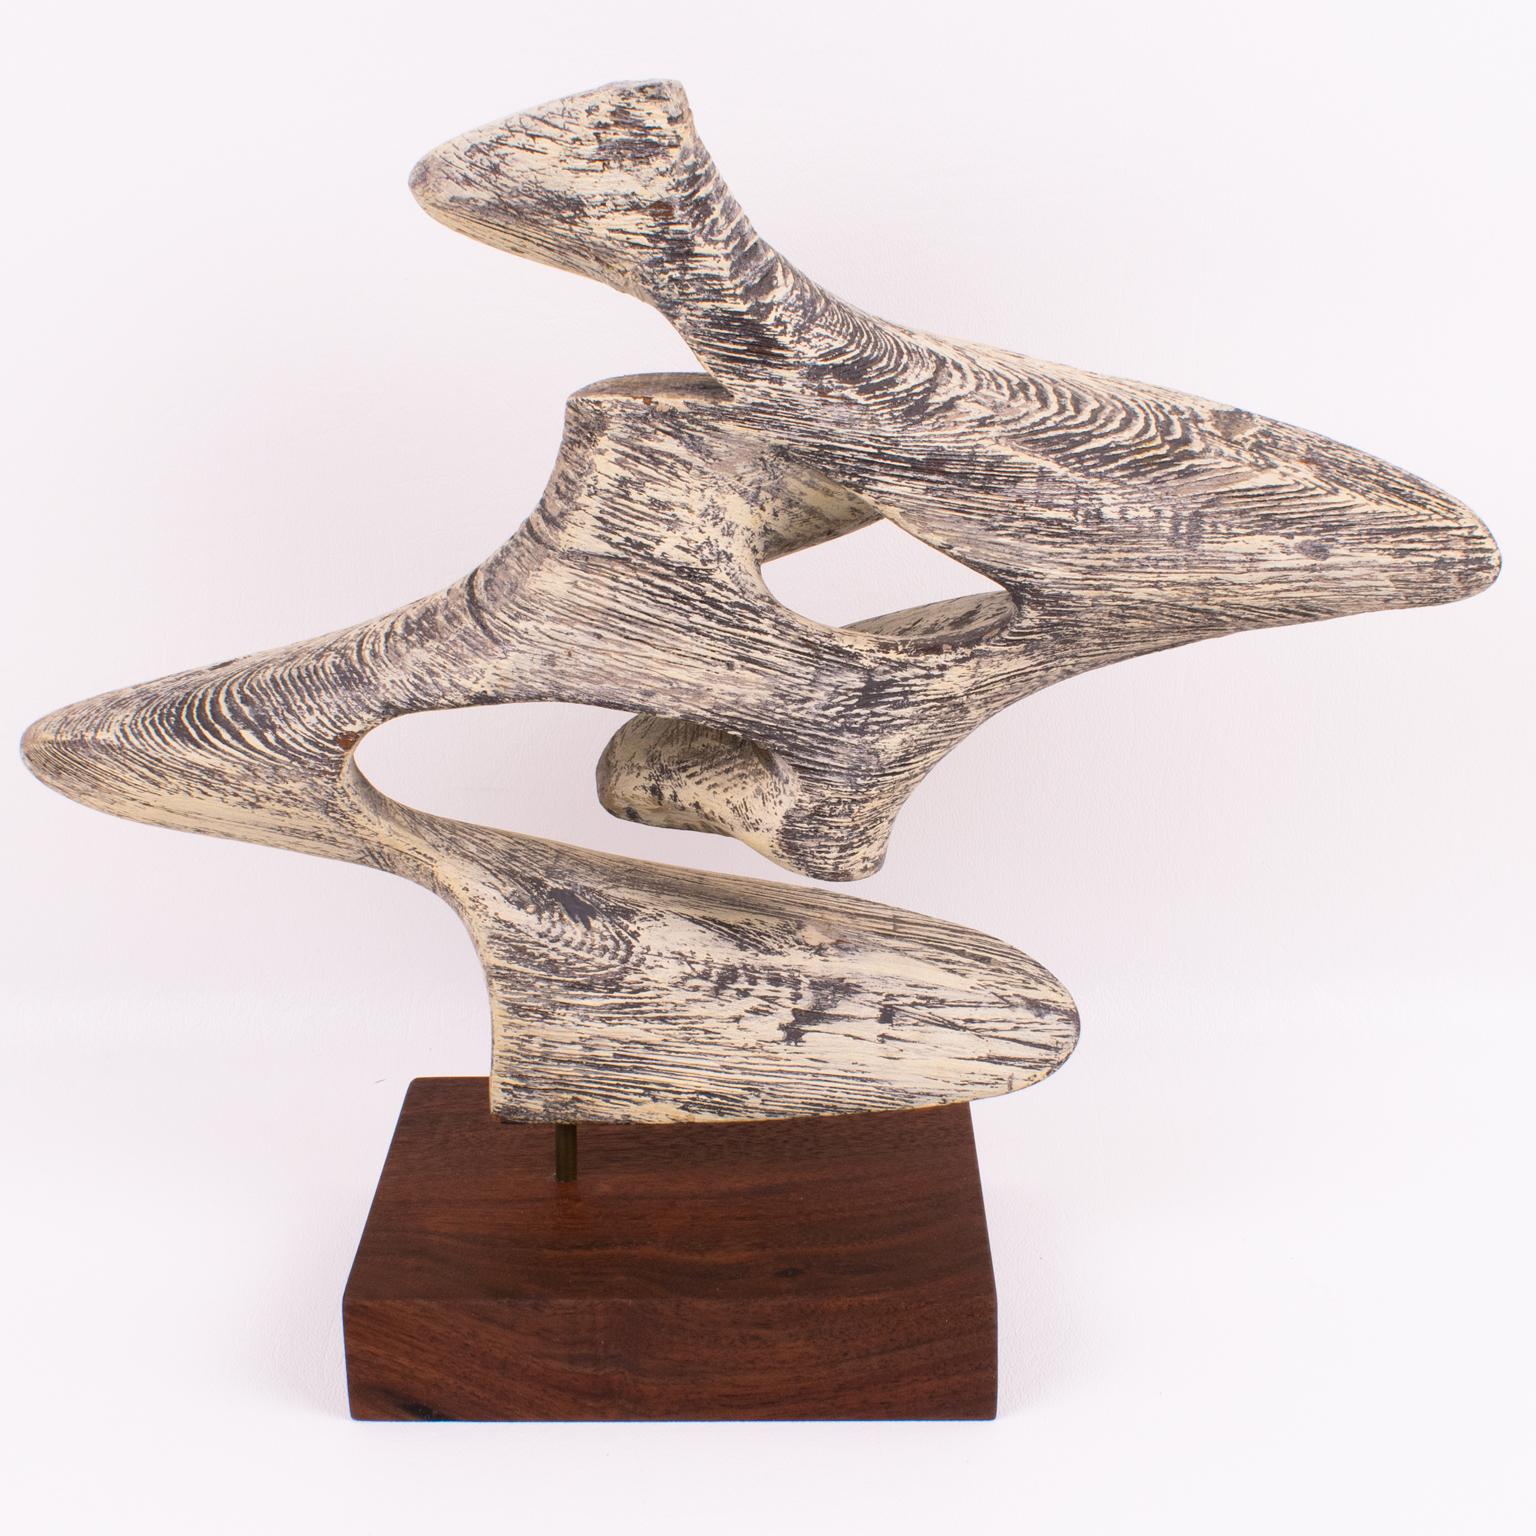 This elegant Mid-Century Modern wooden abstract sculpture was hand-crafted in the 1970s. This finely carved stylized free-form sculpture is made of bleached wood, with a very versatile design different from every angle. The base is made of another